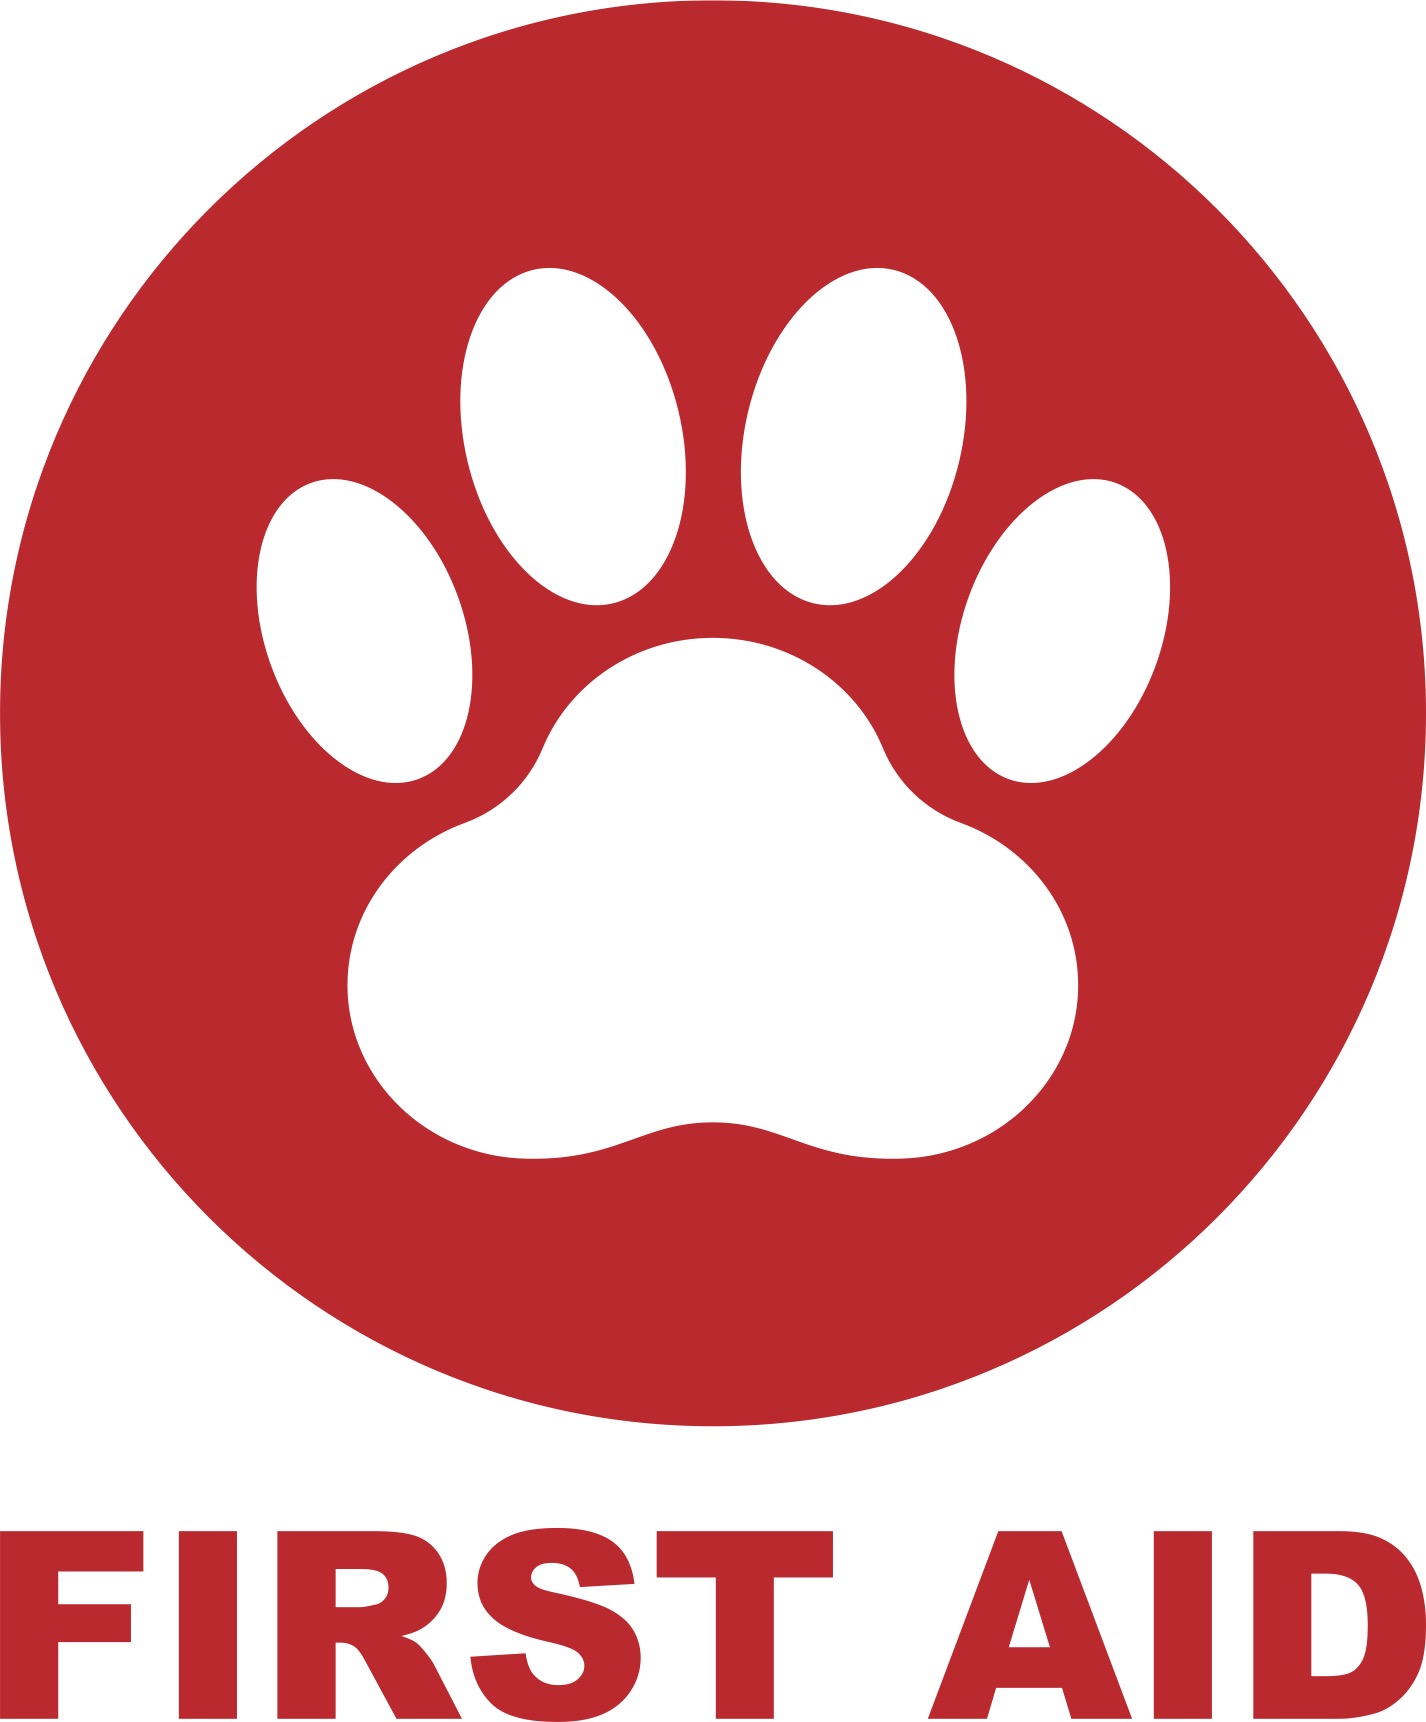 Pet first aid sign